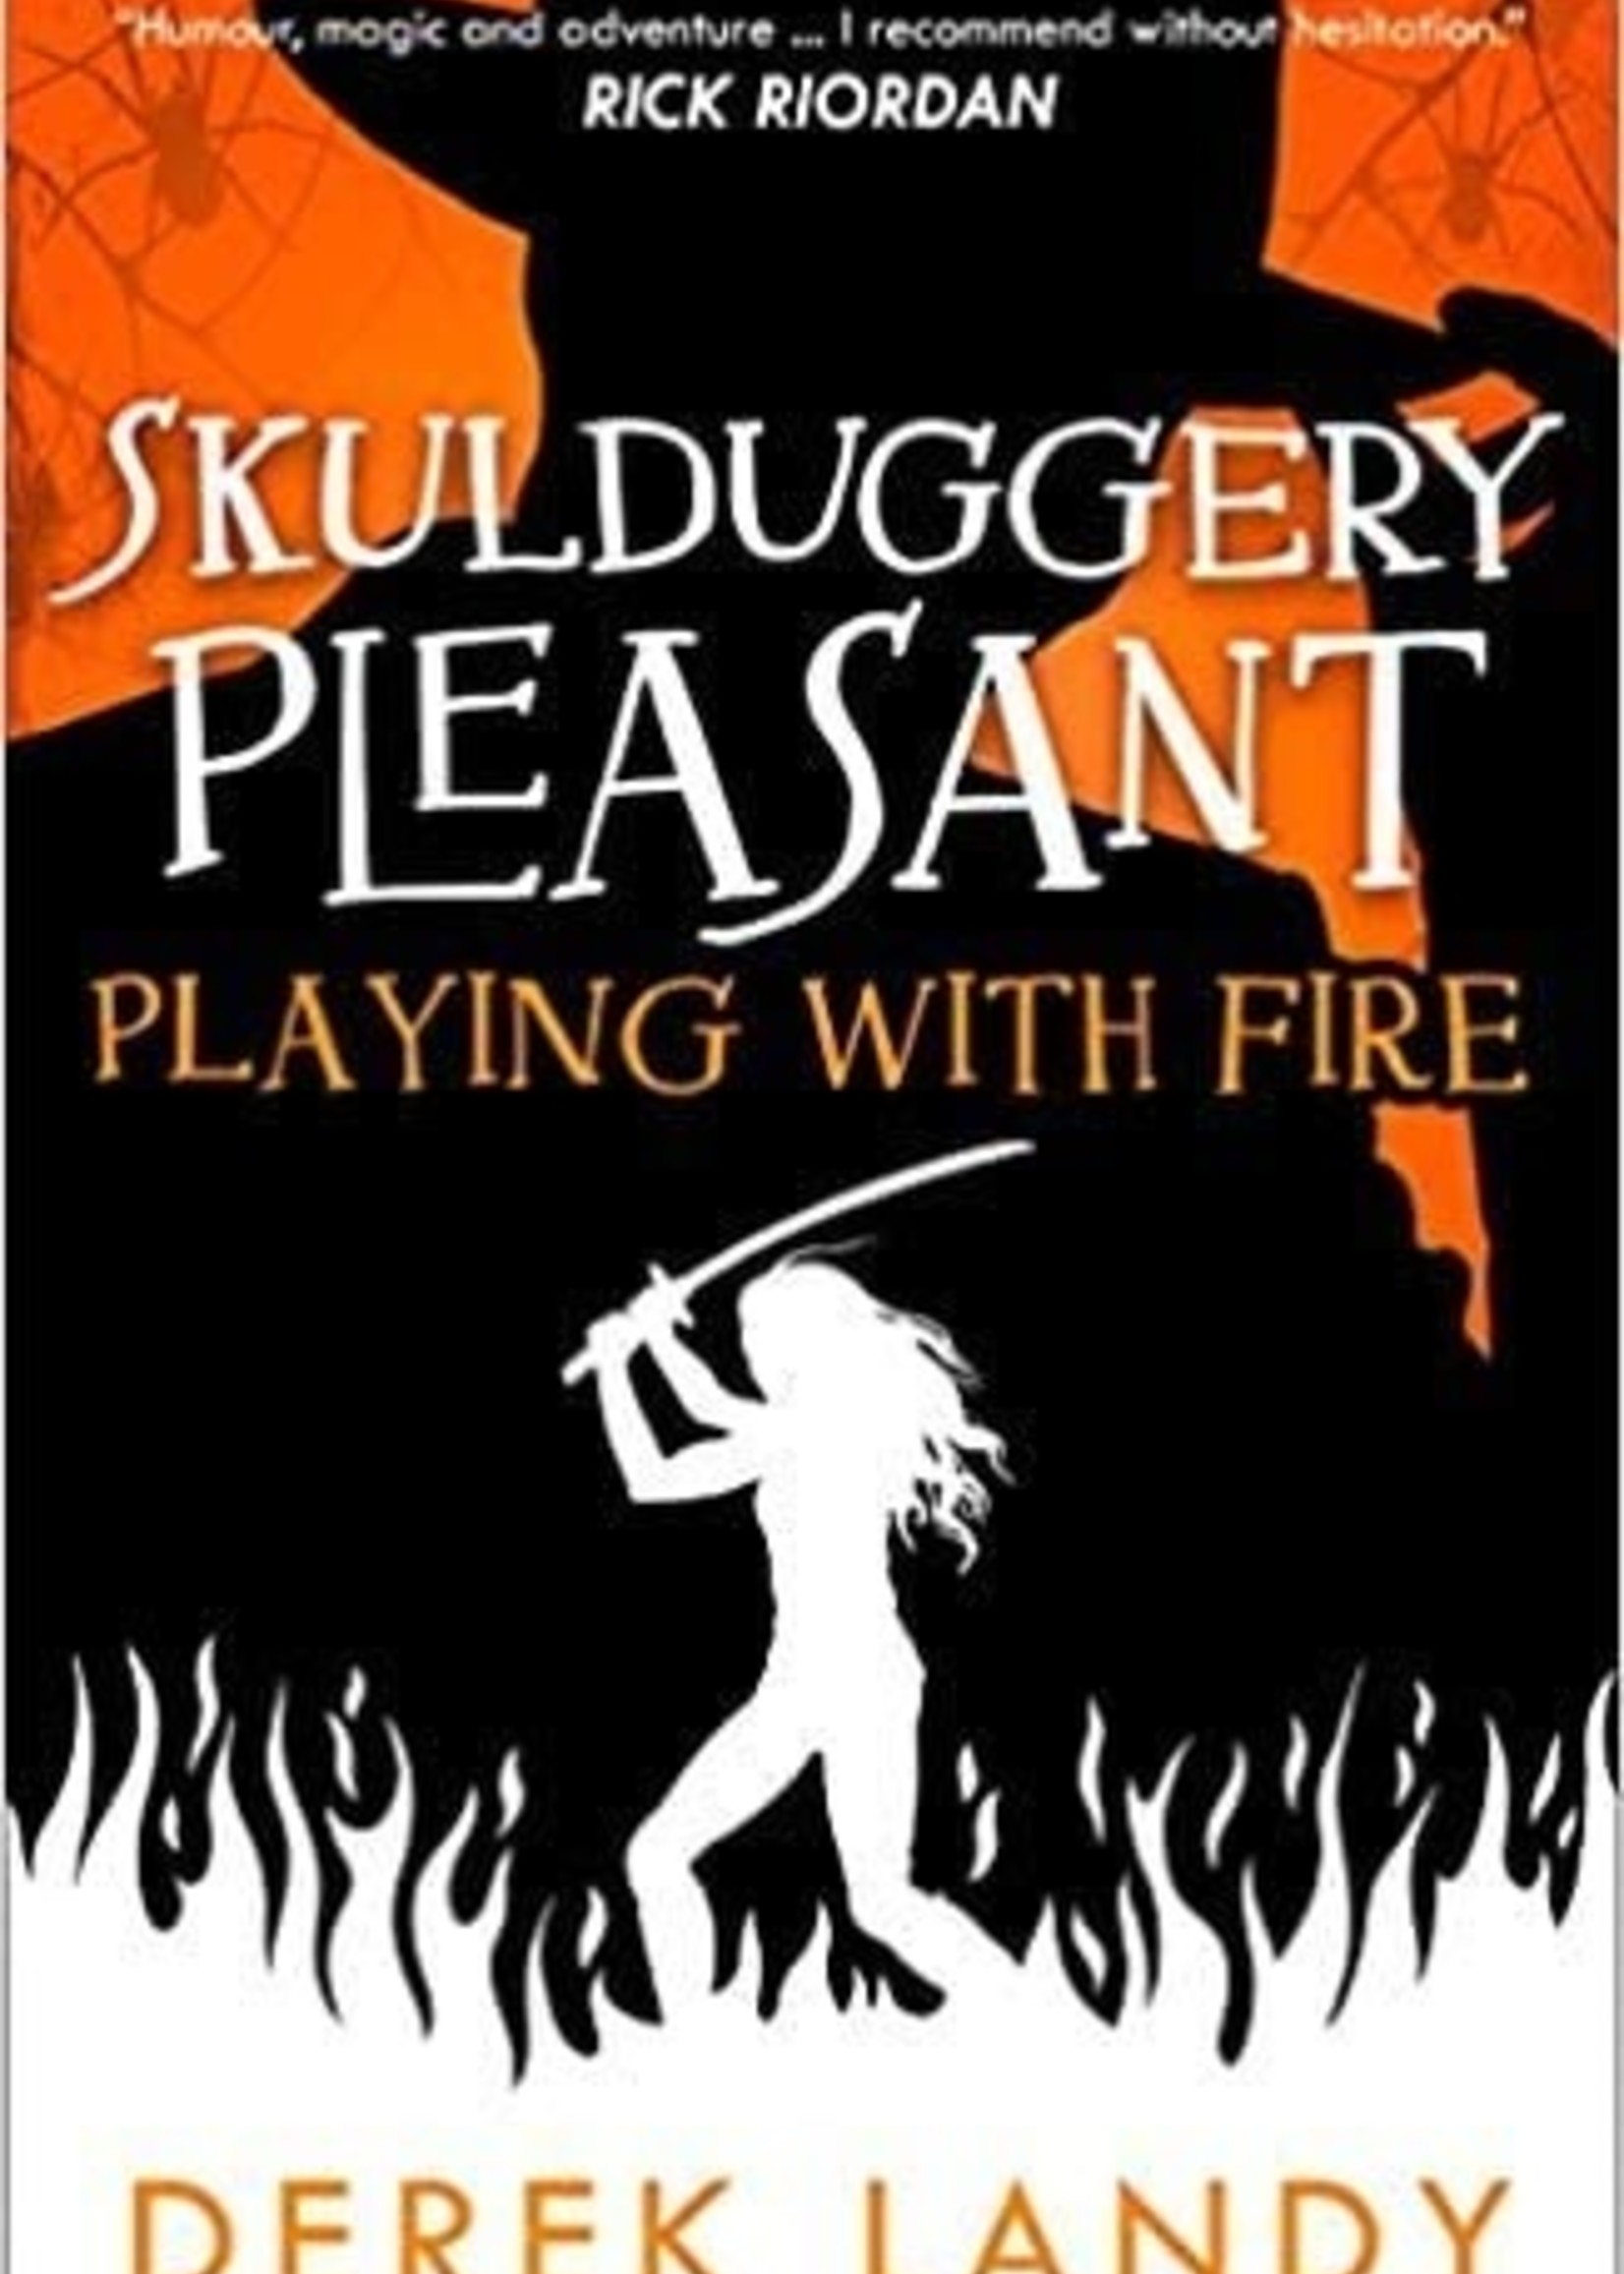 Skulduggery Pleasant #02, Playing with Fire - Paperback